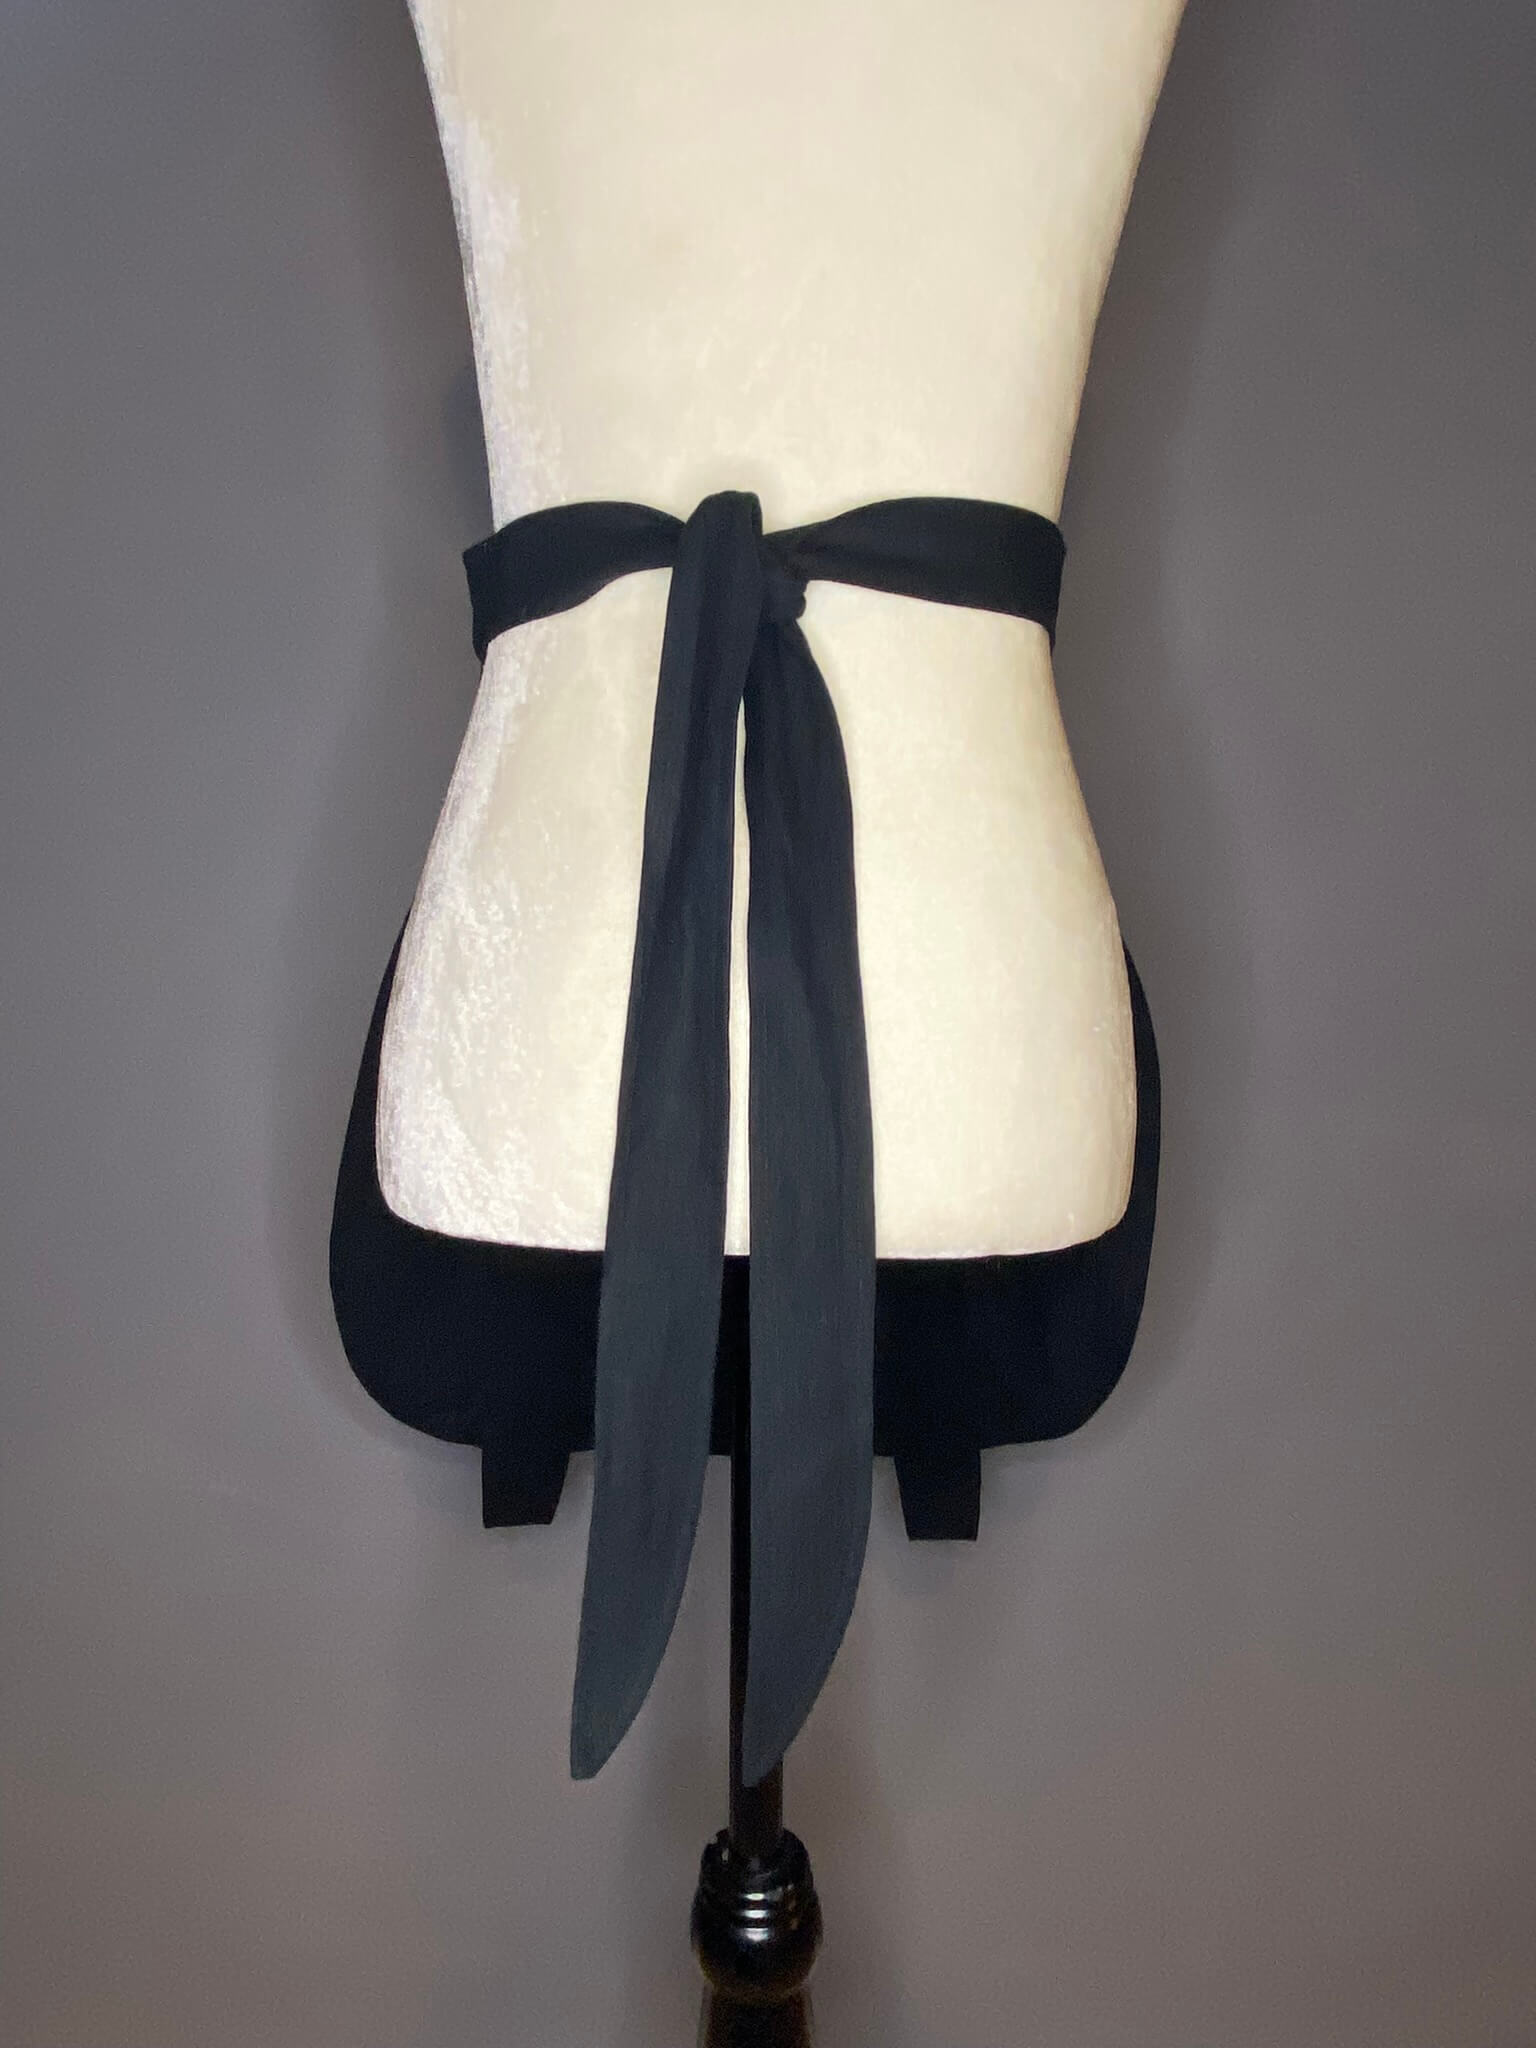 back view of a black, lined cotton linen apron in the shape of a cauldron. Back features two long ties for either your waist or hips.